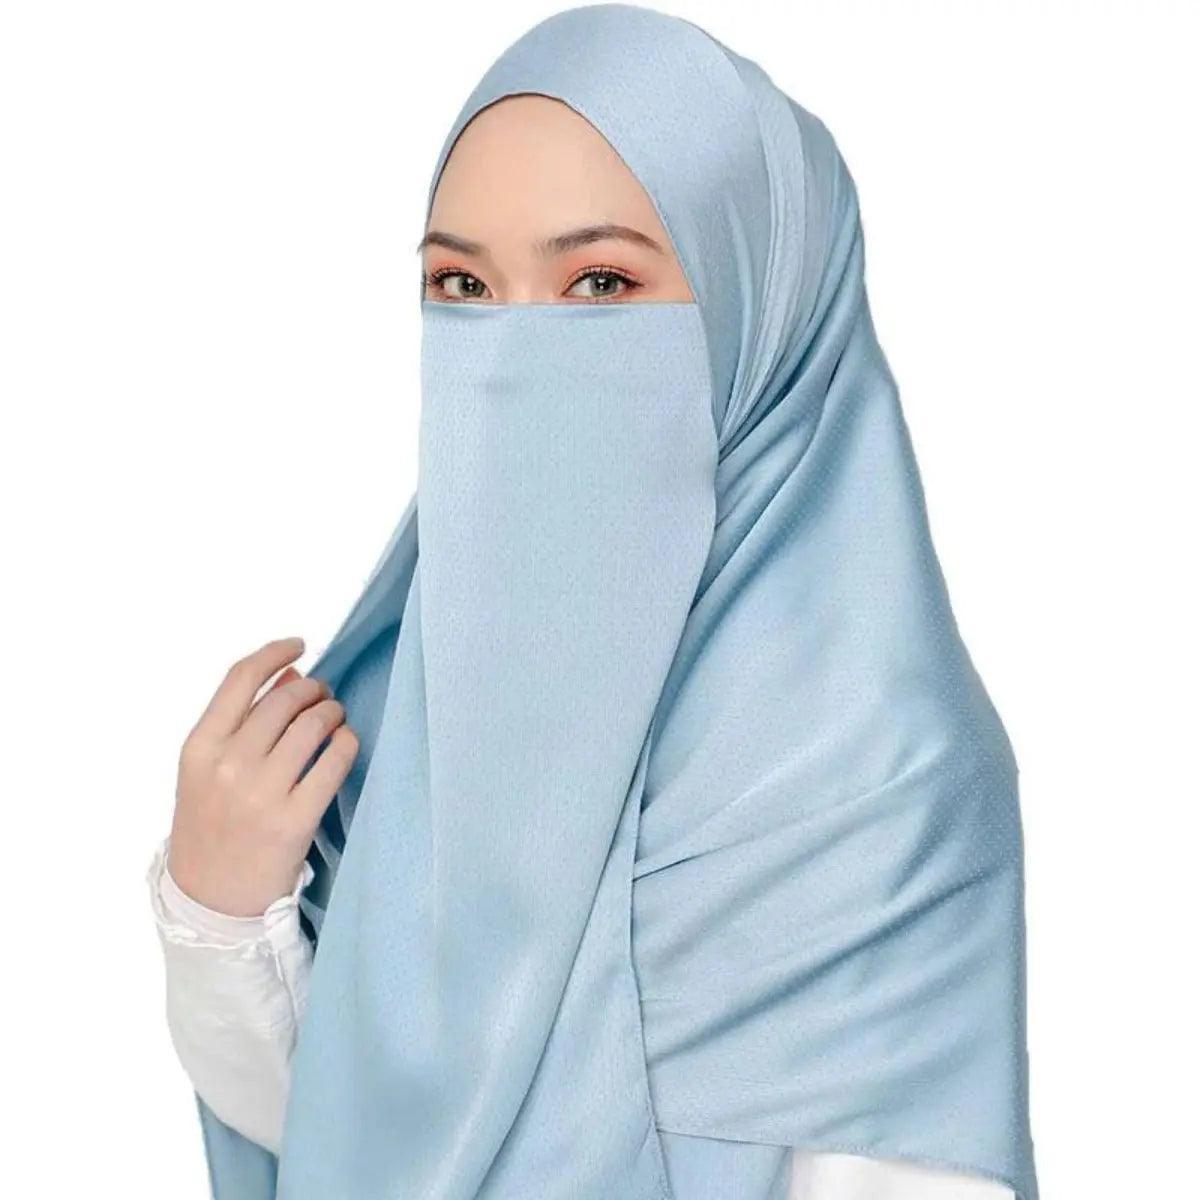 MH013 Textured Satin Star Hijab - Mariam's Collection